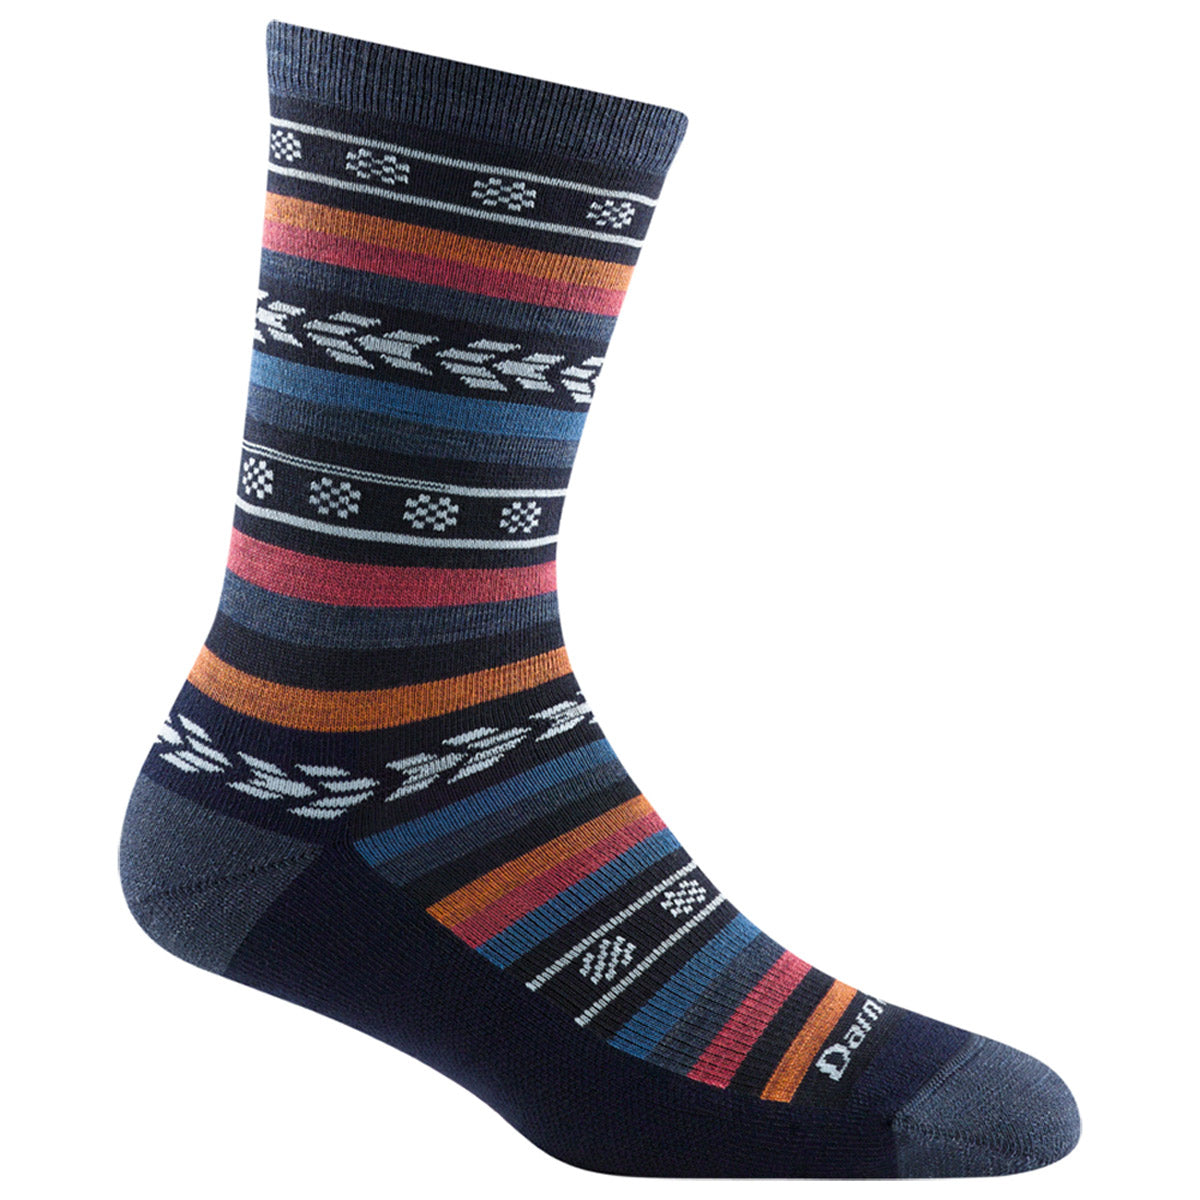 Colorful patterned Darn Tough Bronwyn Crew Socks Denim - Womens displayed against a white background.